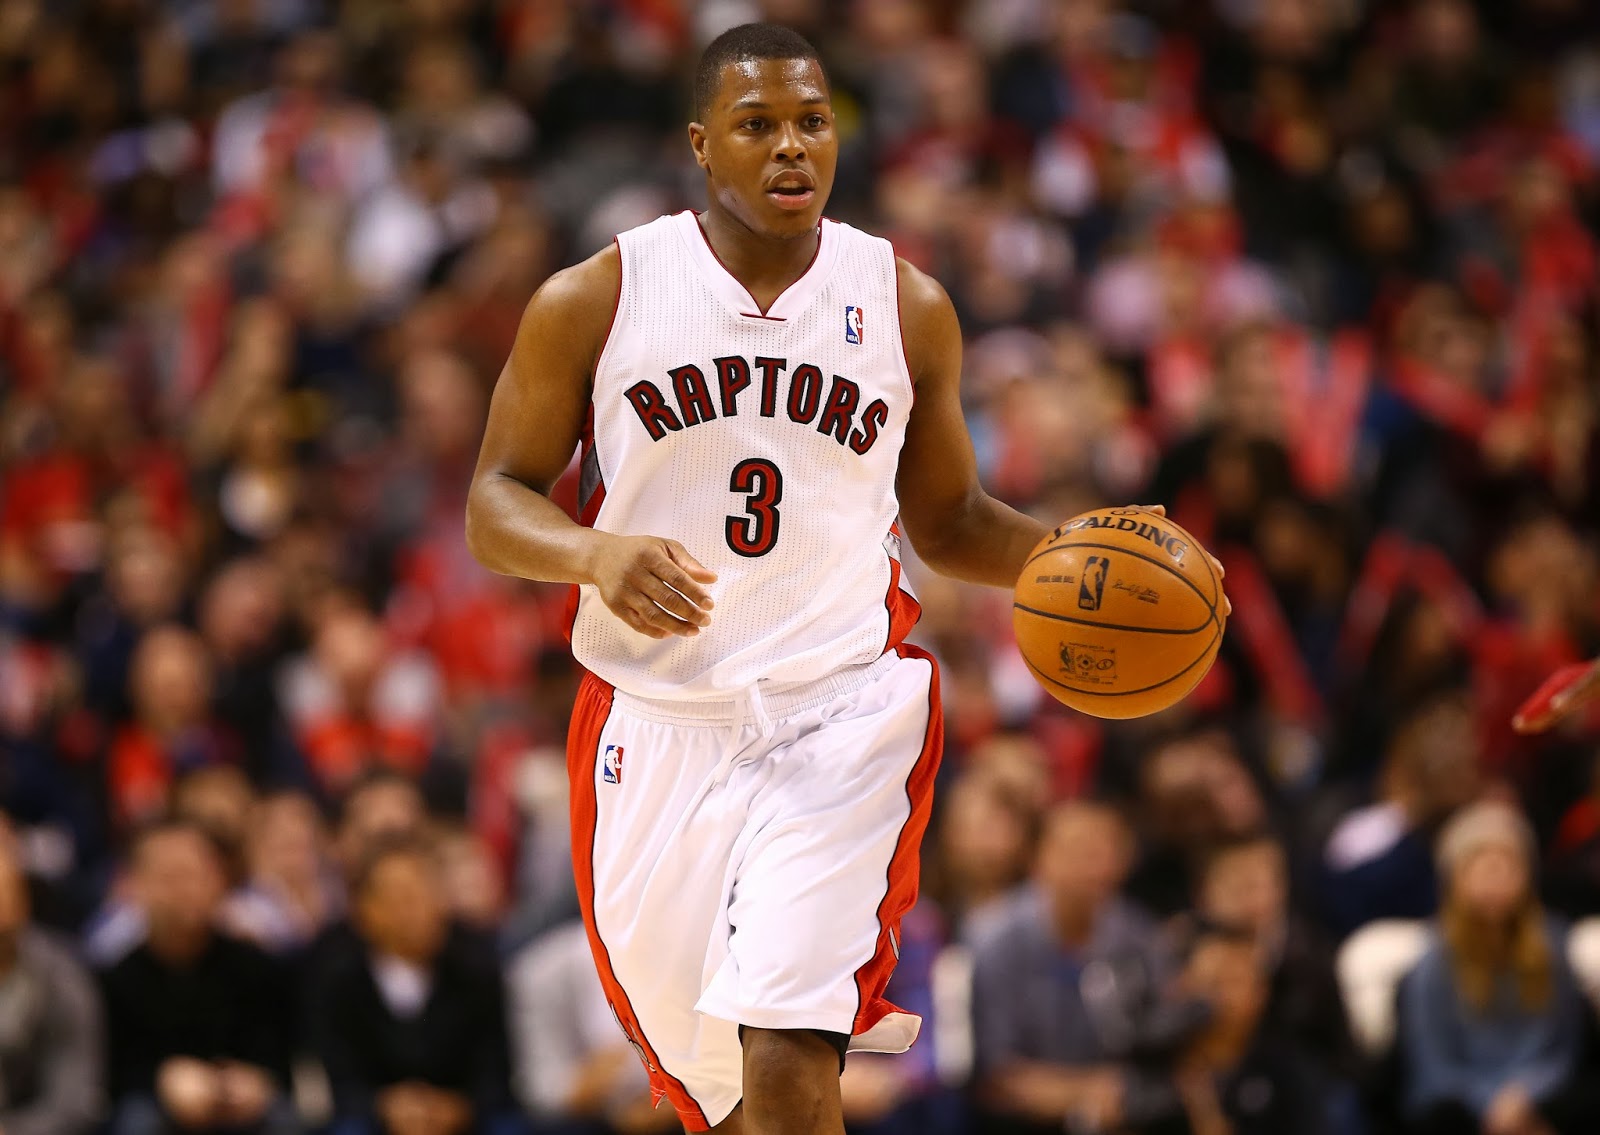 Kyle Lowry Best Player Of The Year Pictures And Wallpaper